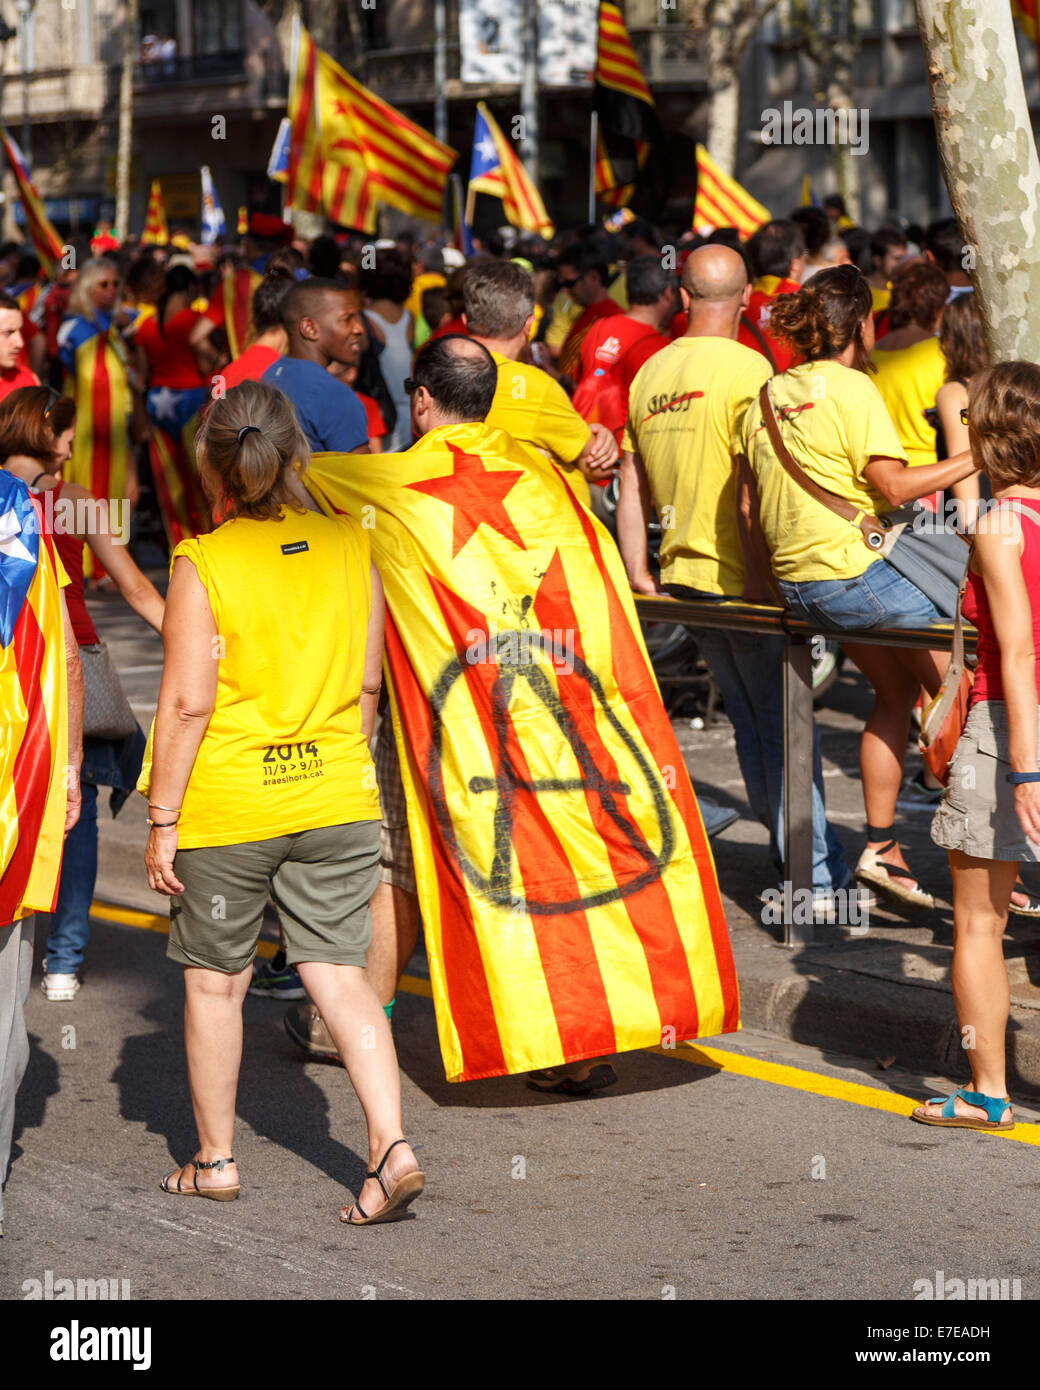 Barcelona, Spain - September 11, 2014: People call for Catalan independence on the 300th Catalan National Day in the streets of  Stock Photo